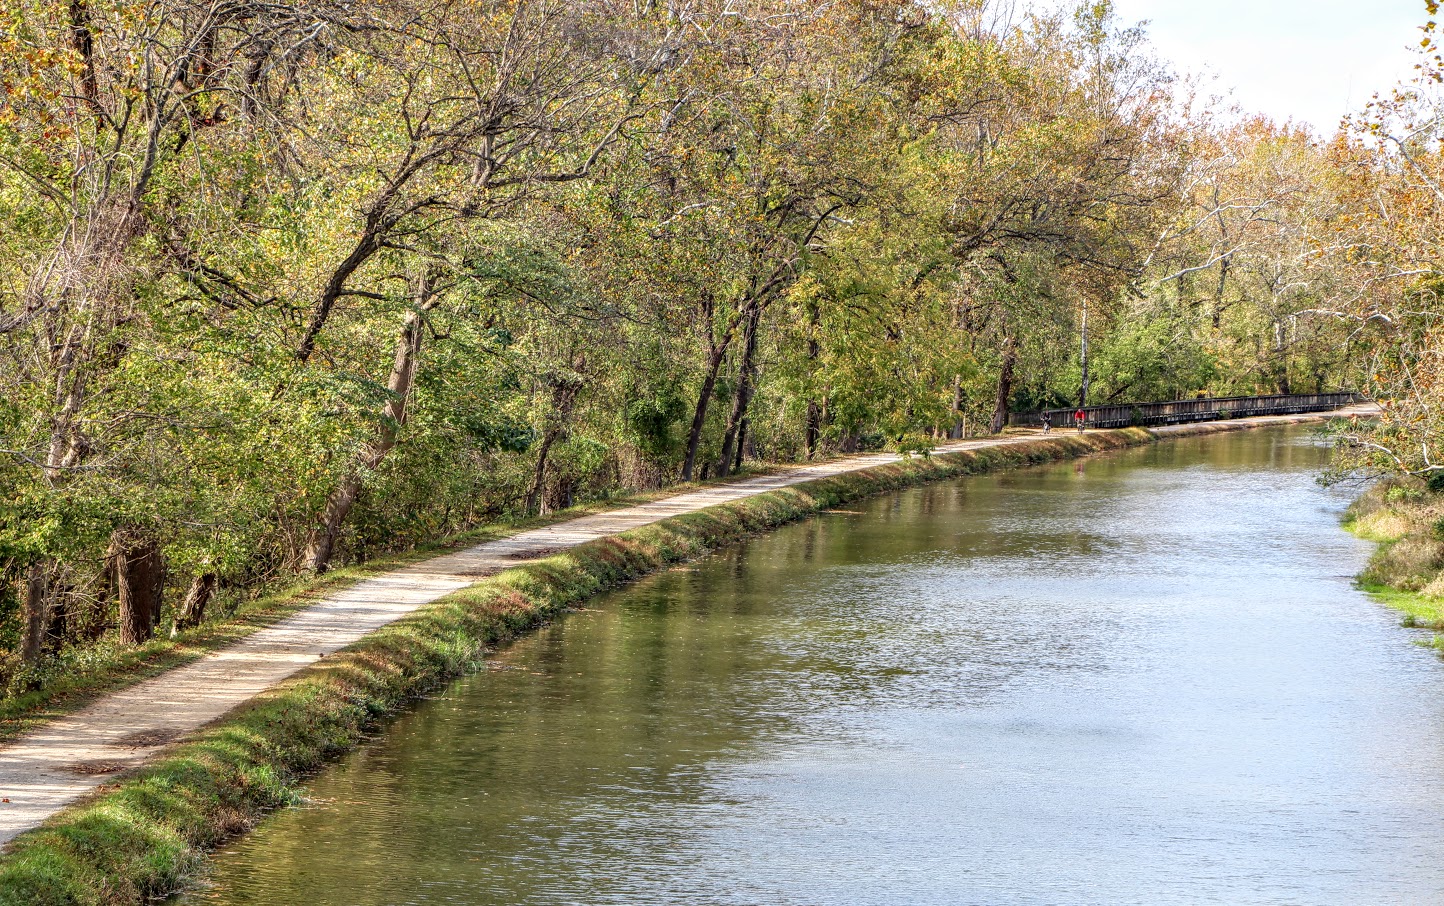 The C&O Canal is a great place to bike or hike.